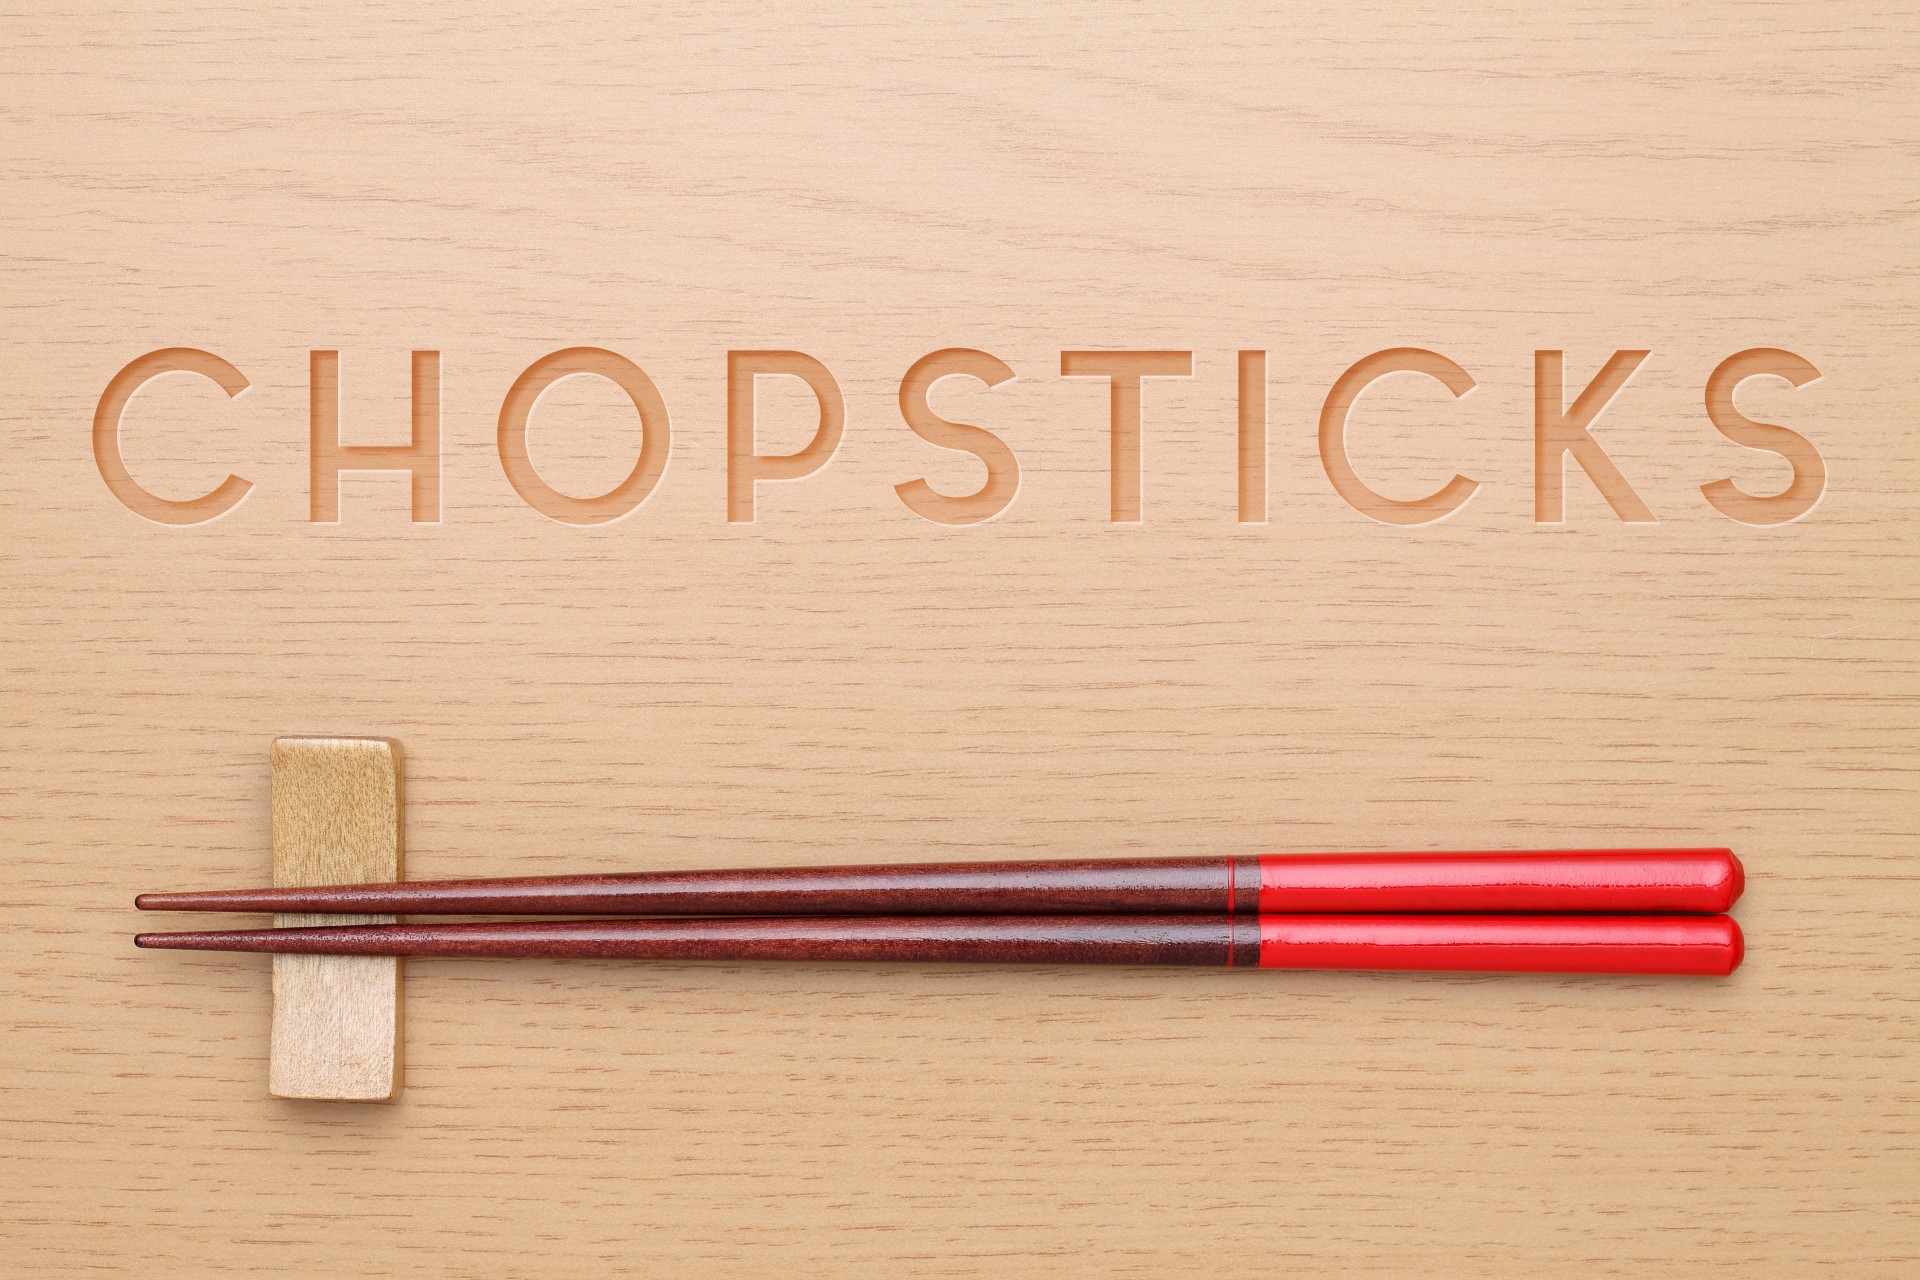 One off Chopsticks Market - Global Industry Analysis and Forecast | 2024